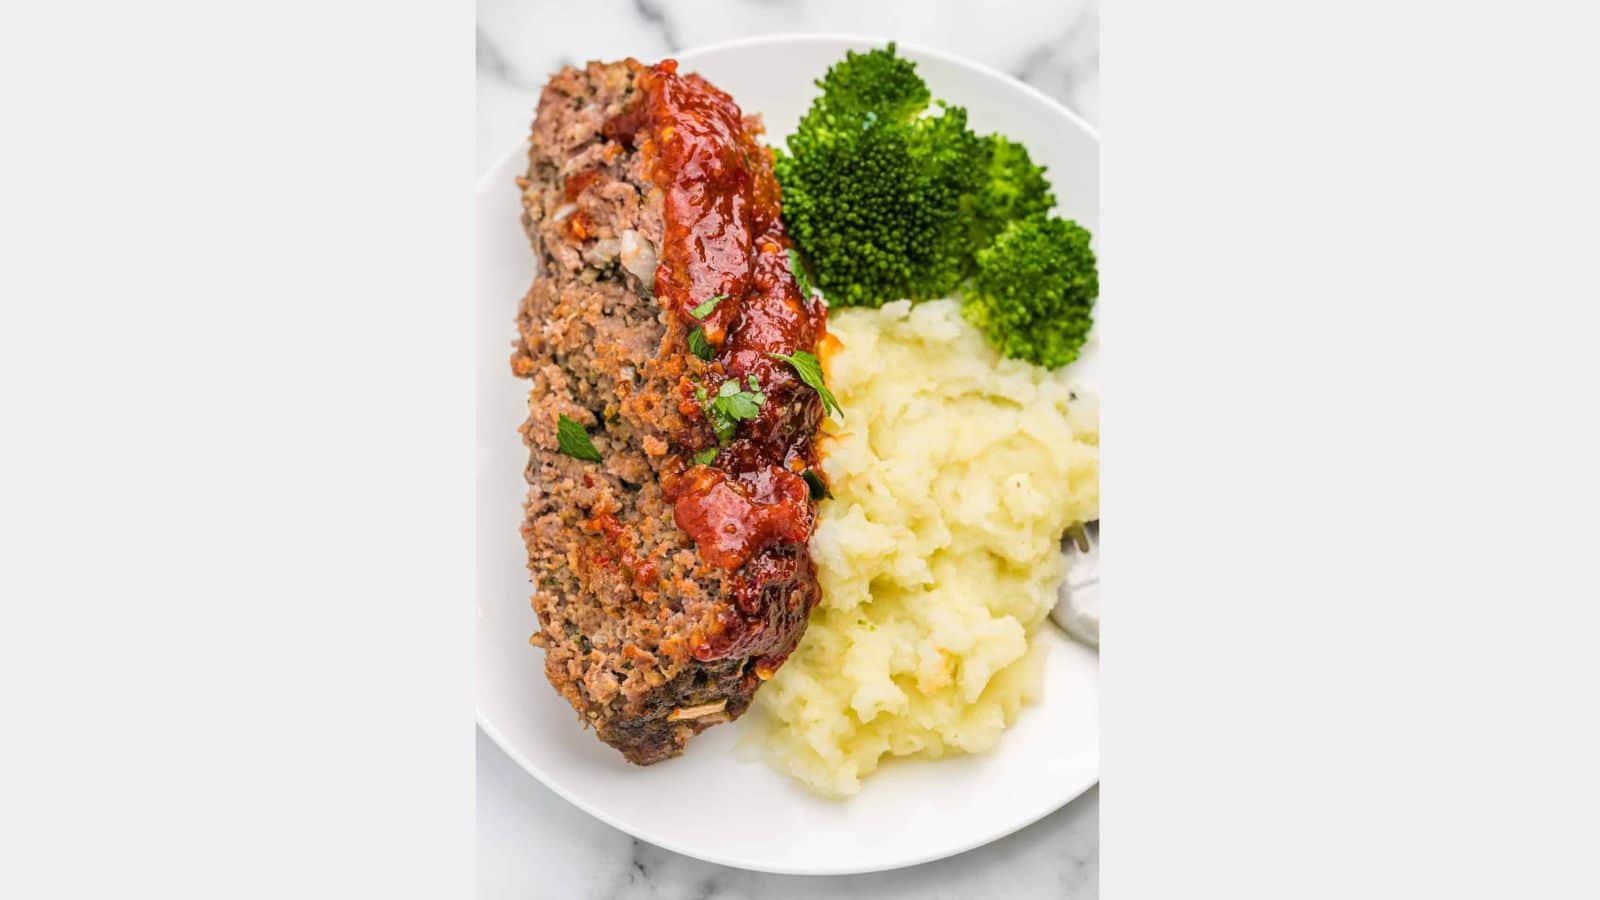 meatloaf with broccoli and mashed potatoes on a plate